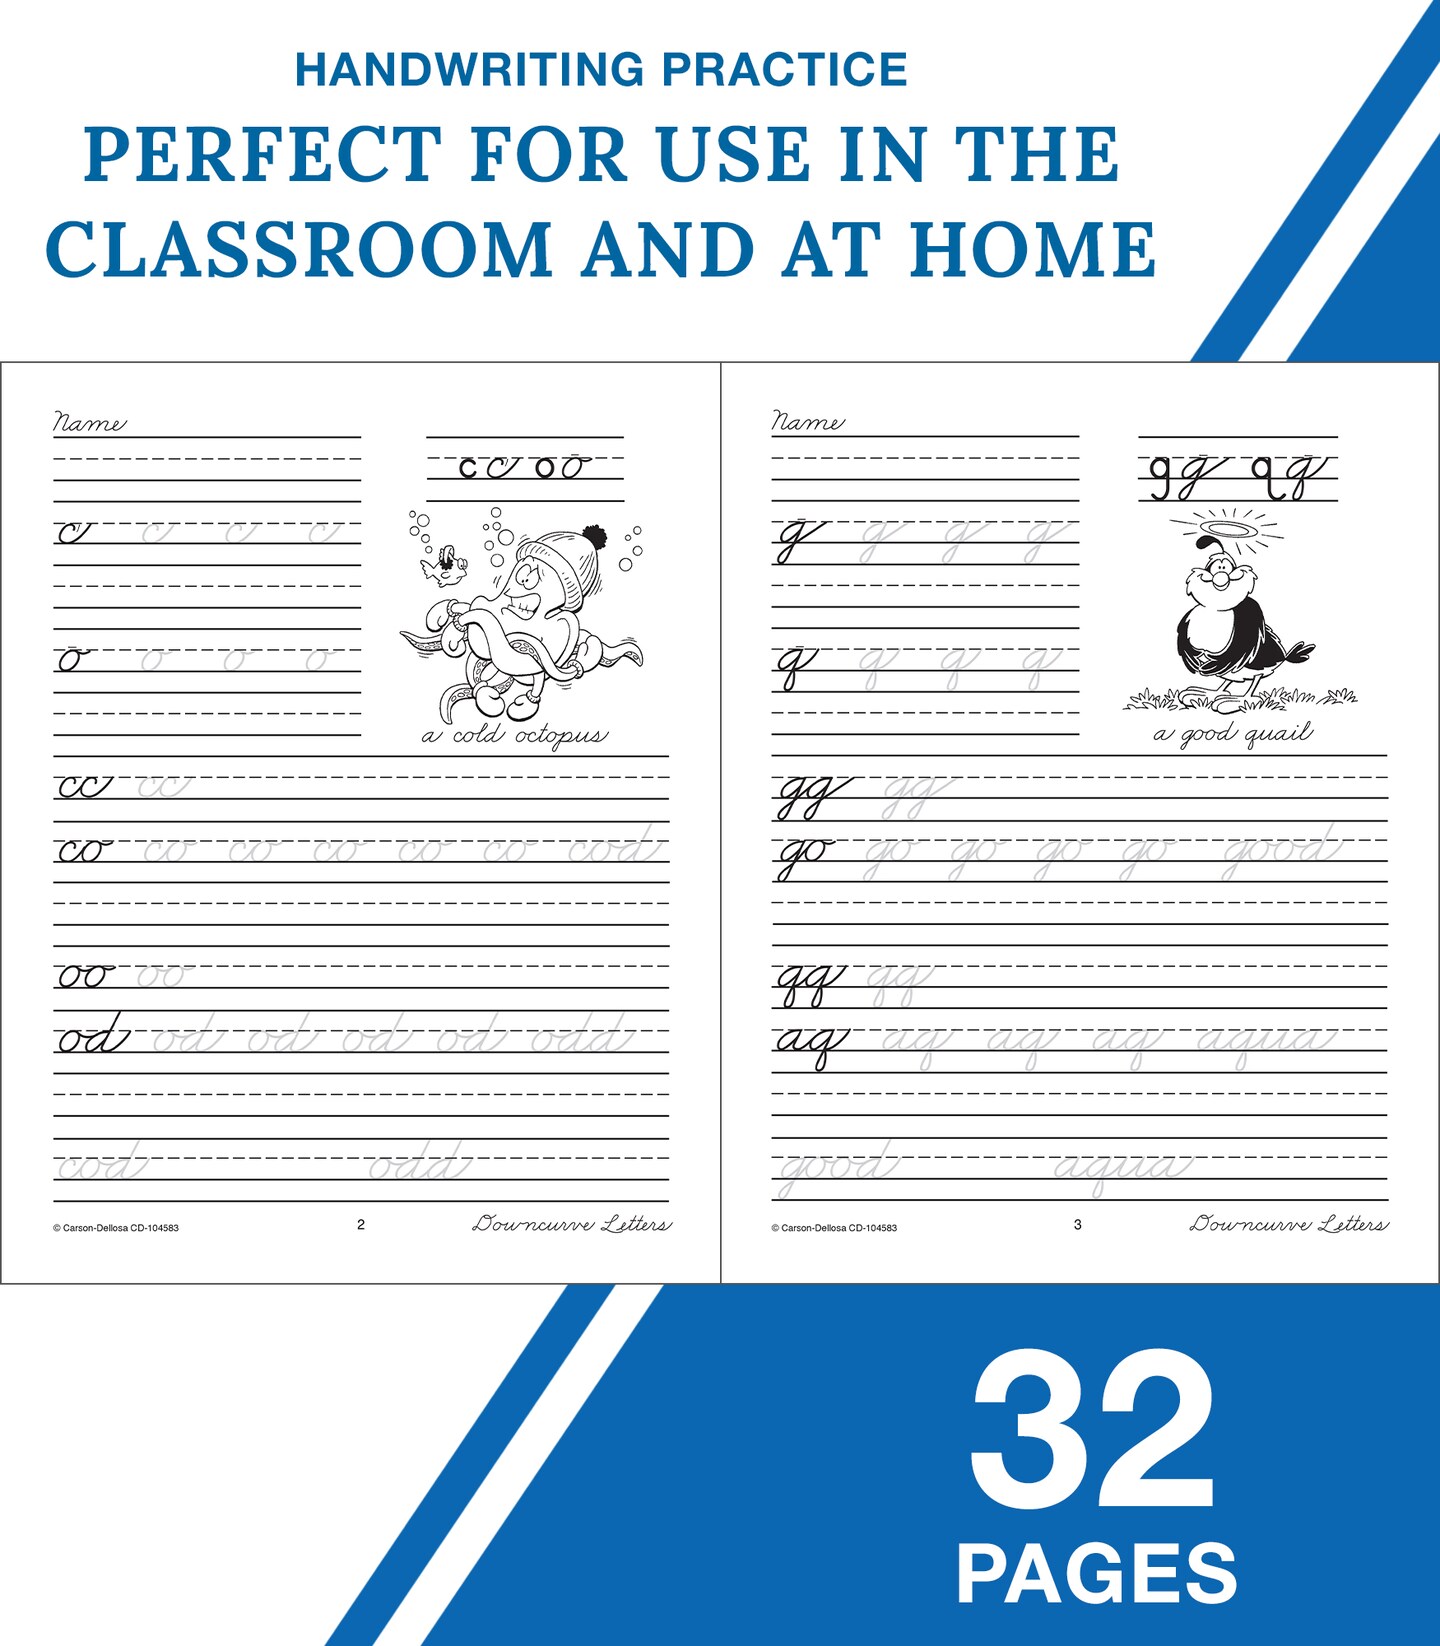 Carson Dellosa Beginning Traditional Cursive Handwriting Workbook for Kids, Handwriting Practice for Cursive Alphabet and Numbers